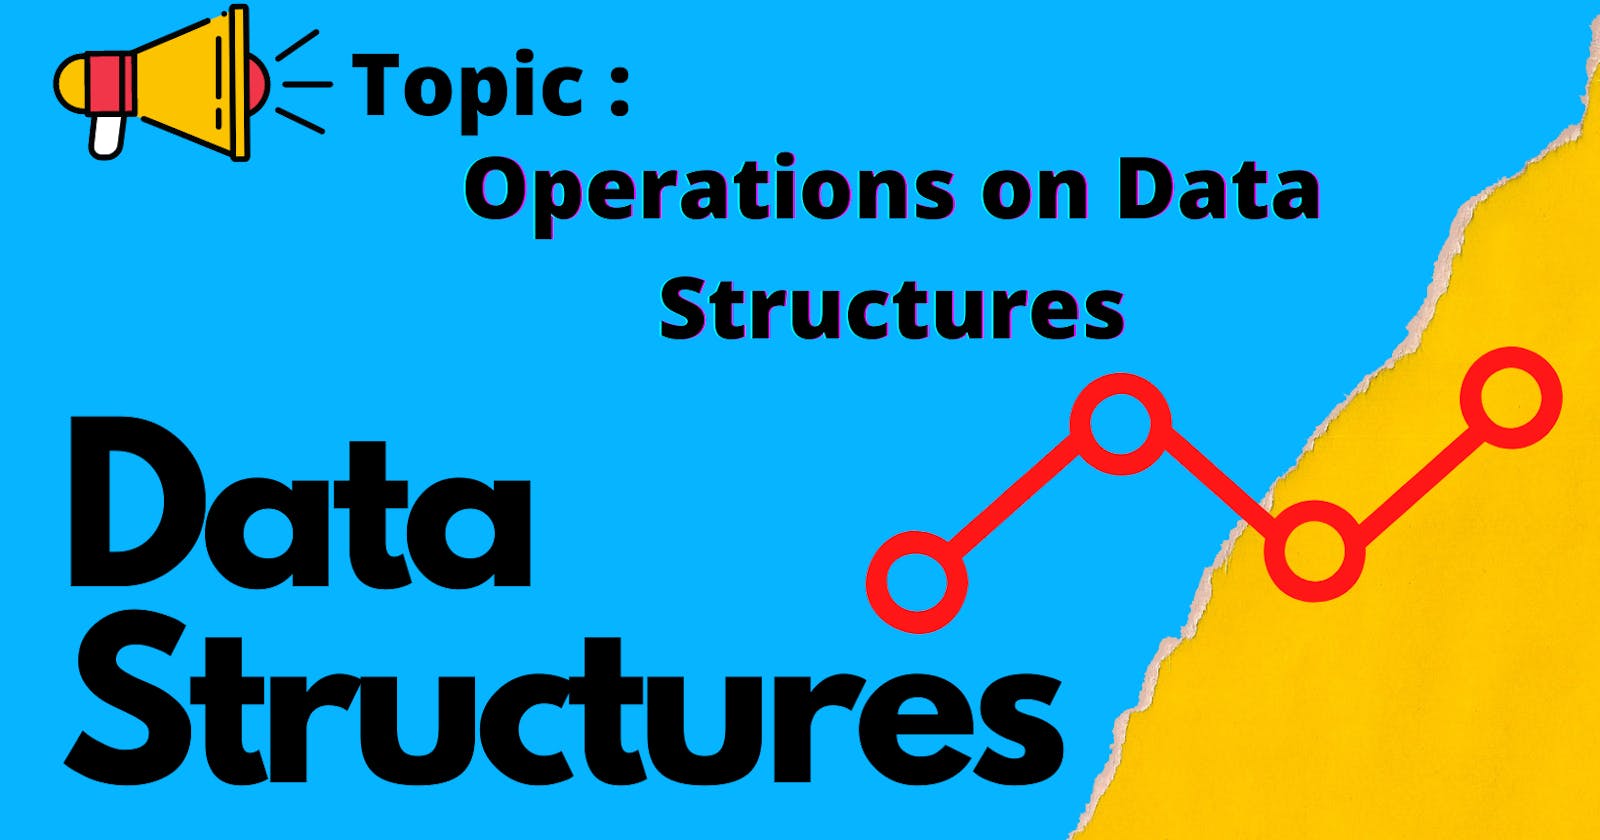 Operations on Data Structures